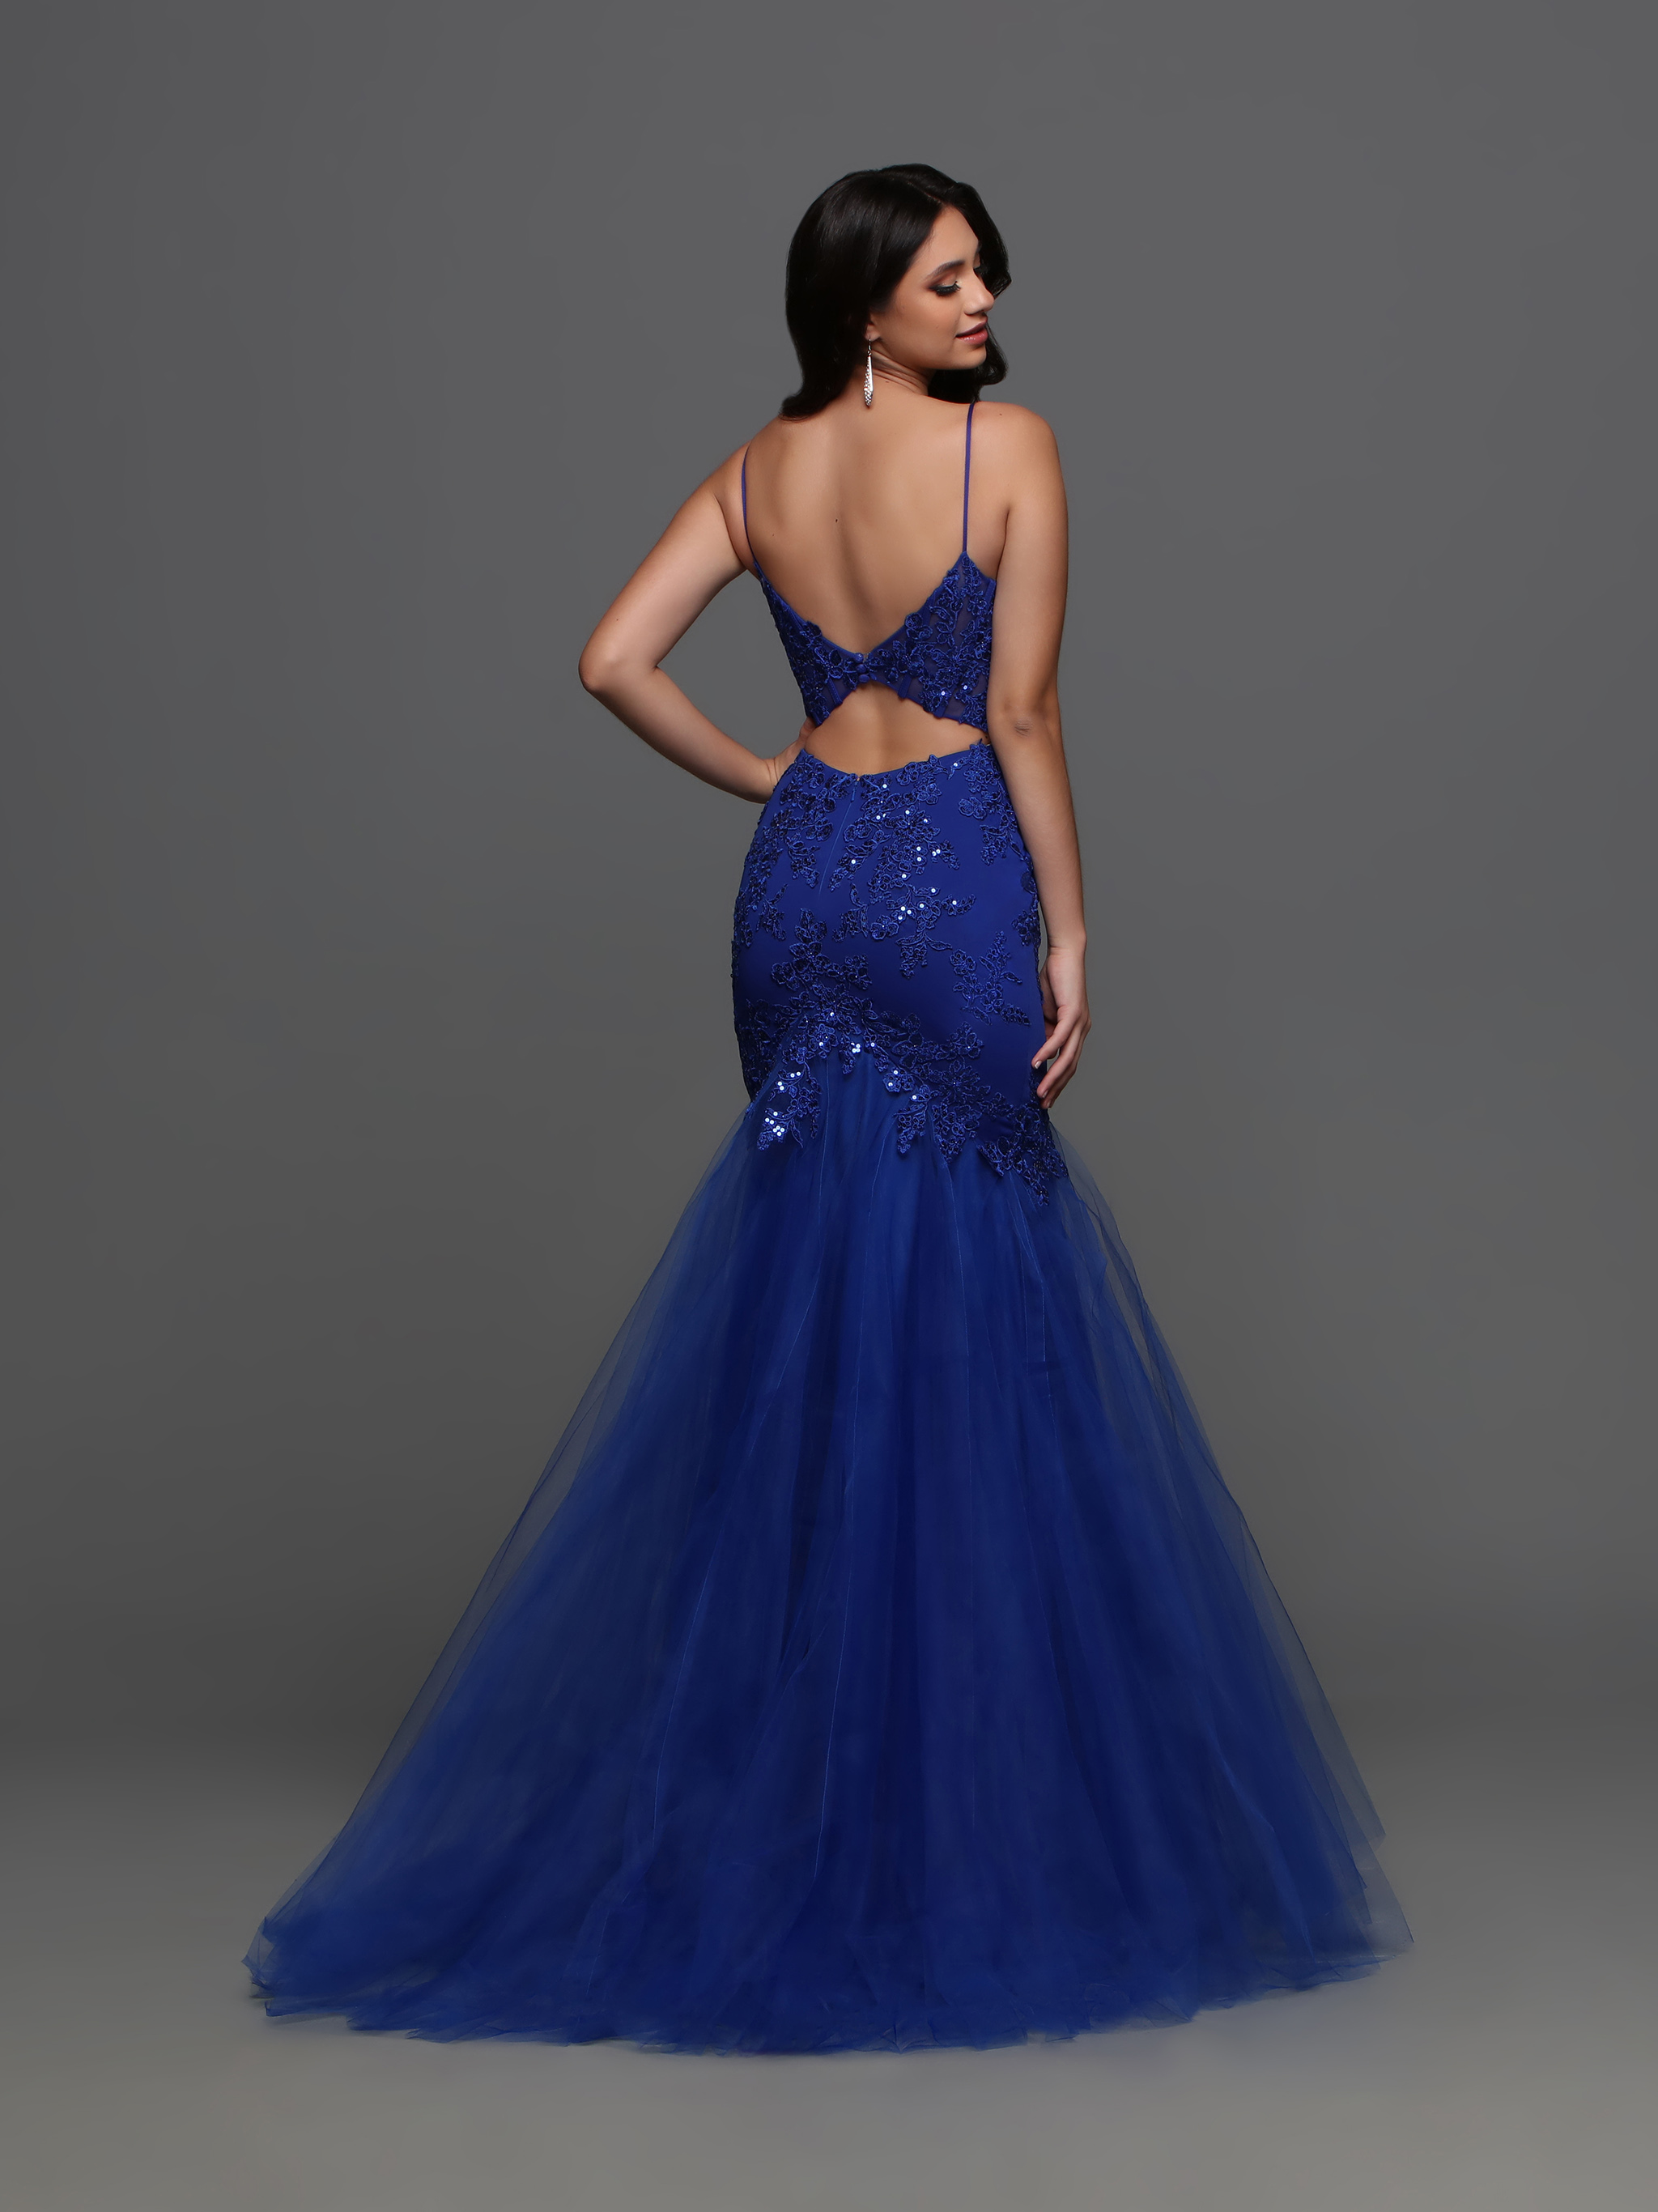 Image showing back view of style #72321